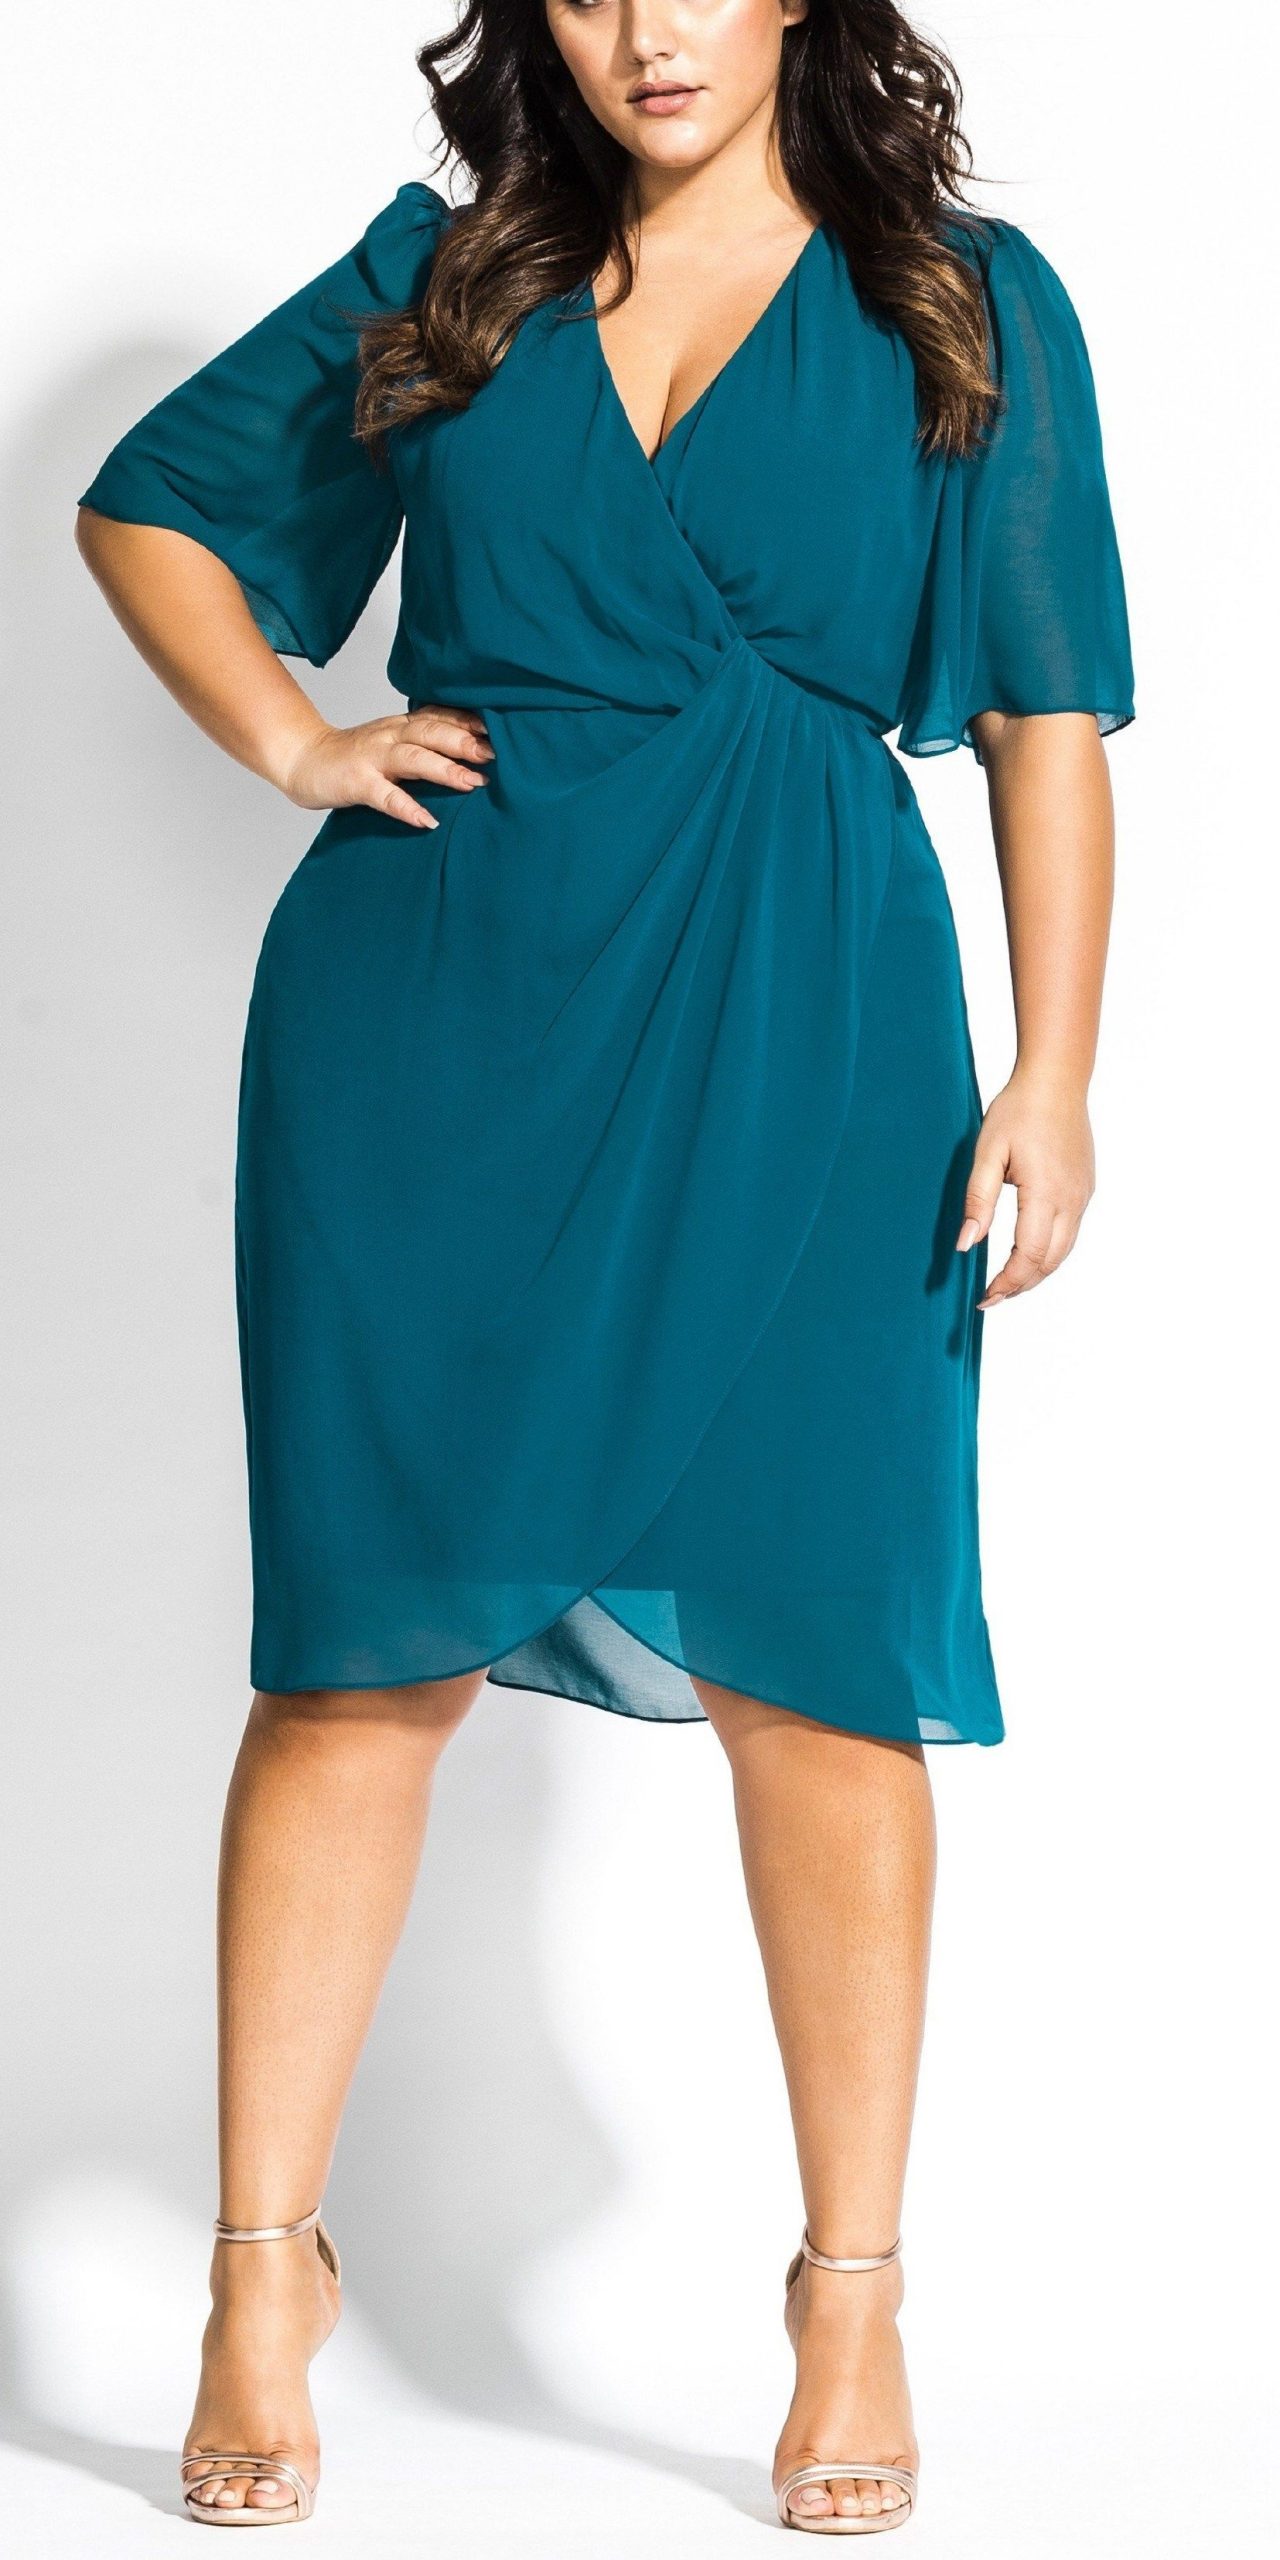 36 Plus Size Wedding Guest Dresses {with Sleeves